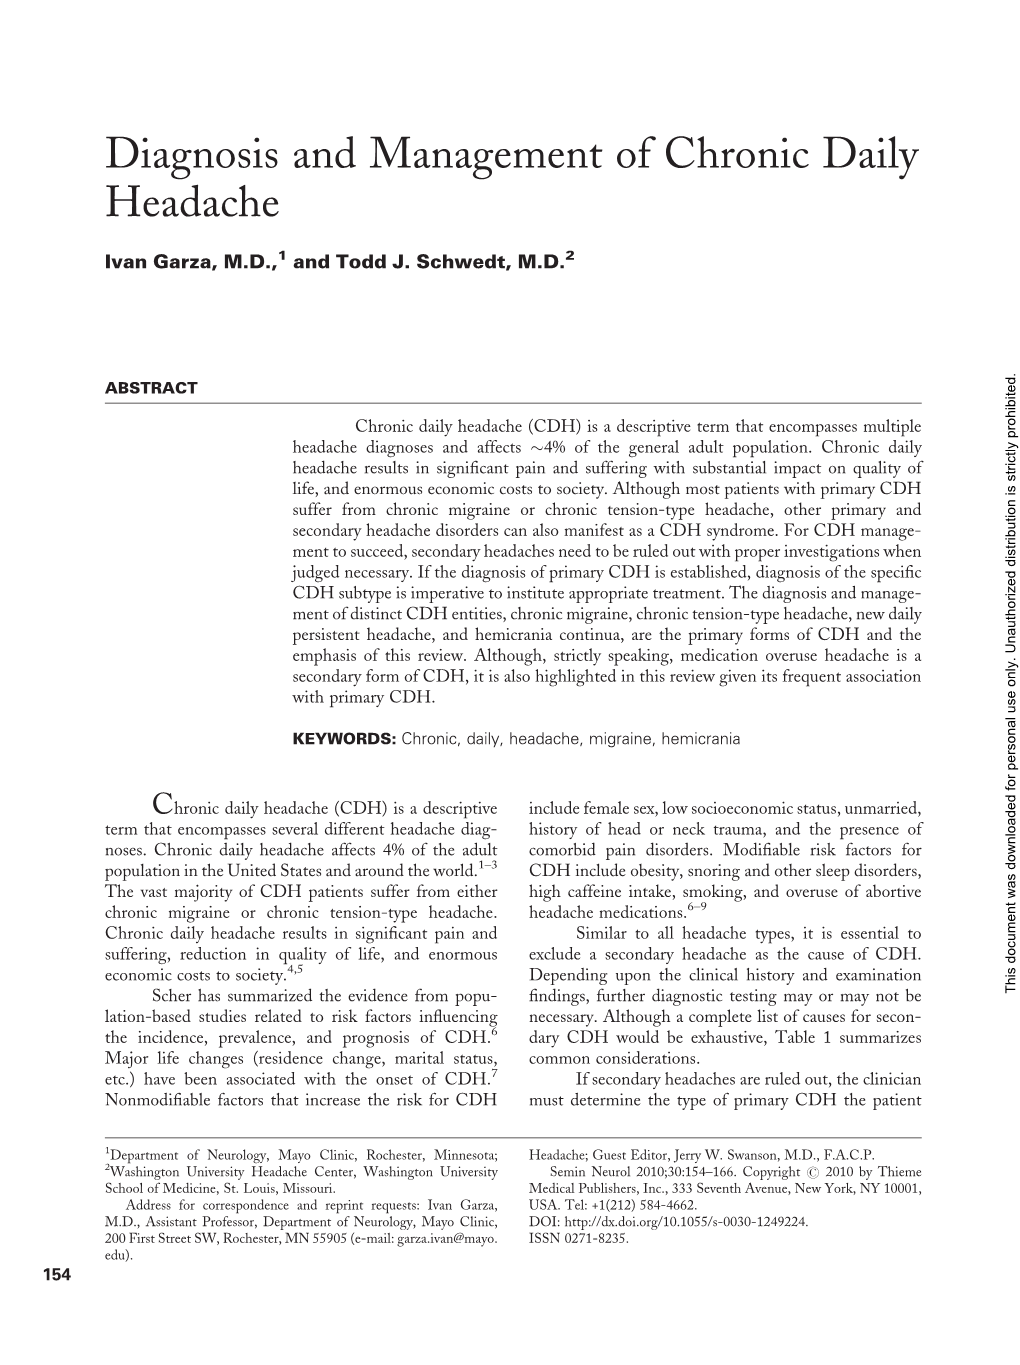 Diagnosis and Management of Chronic Daily Headache